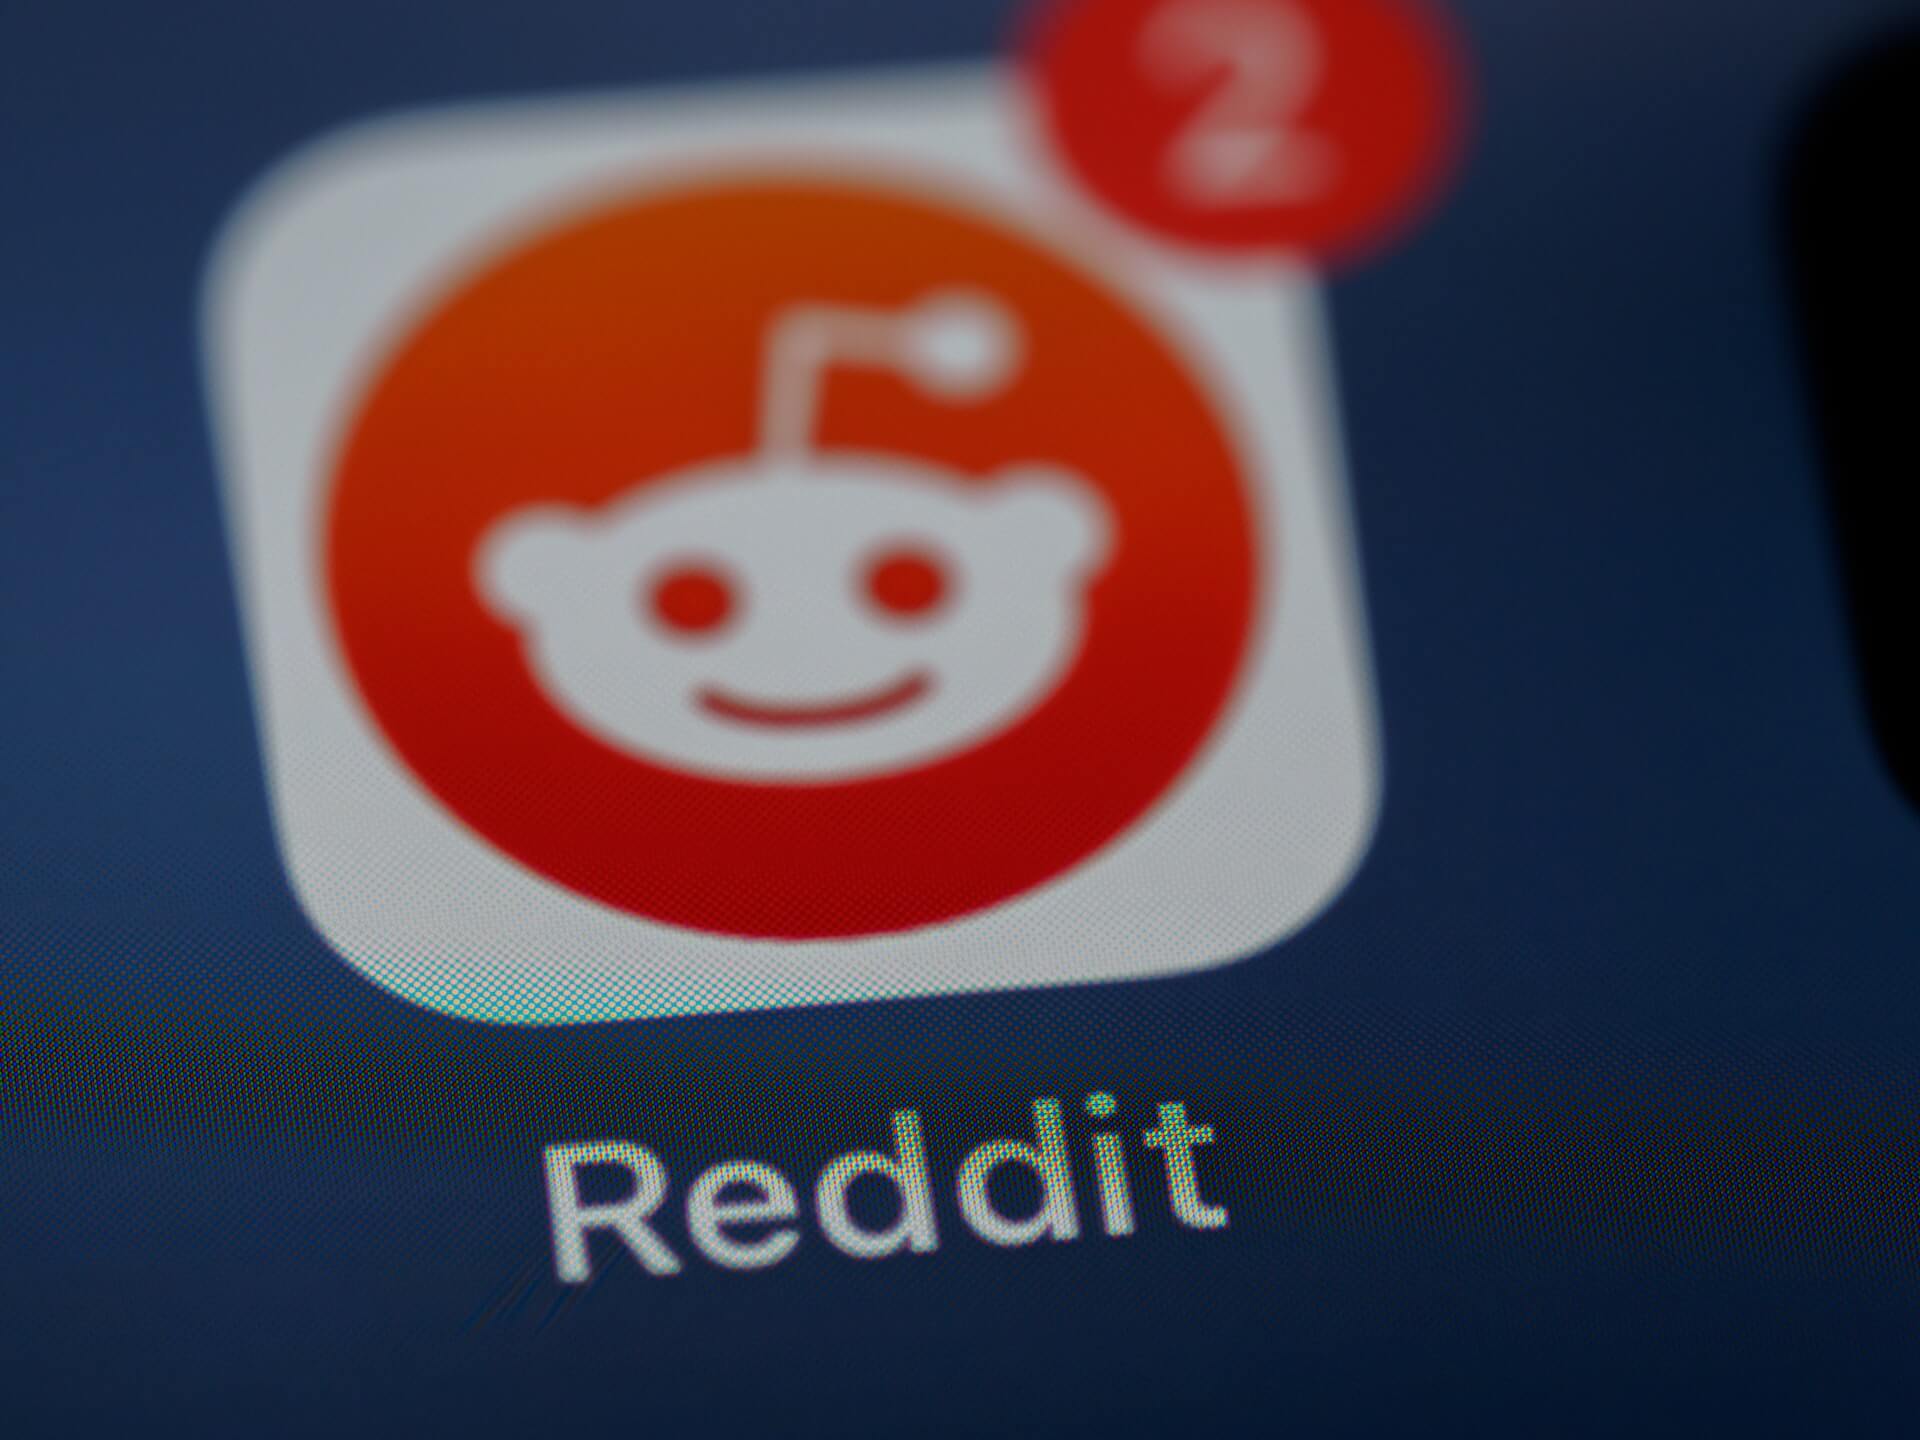 Reddit is Giving Away Free NFTs using Polygon: How can you get one? Reddit Icon with 2 Notifications